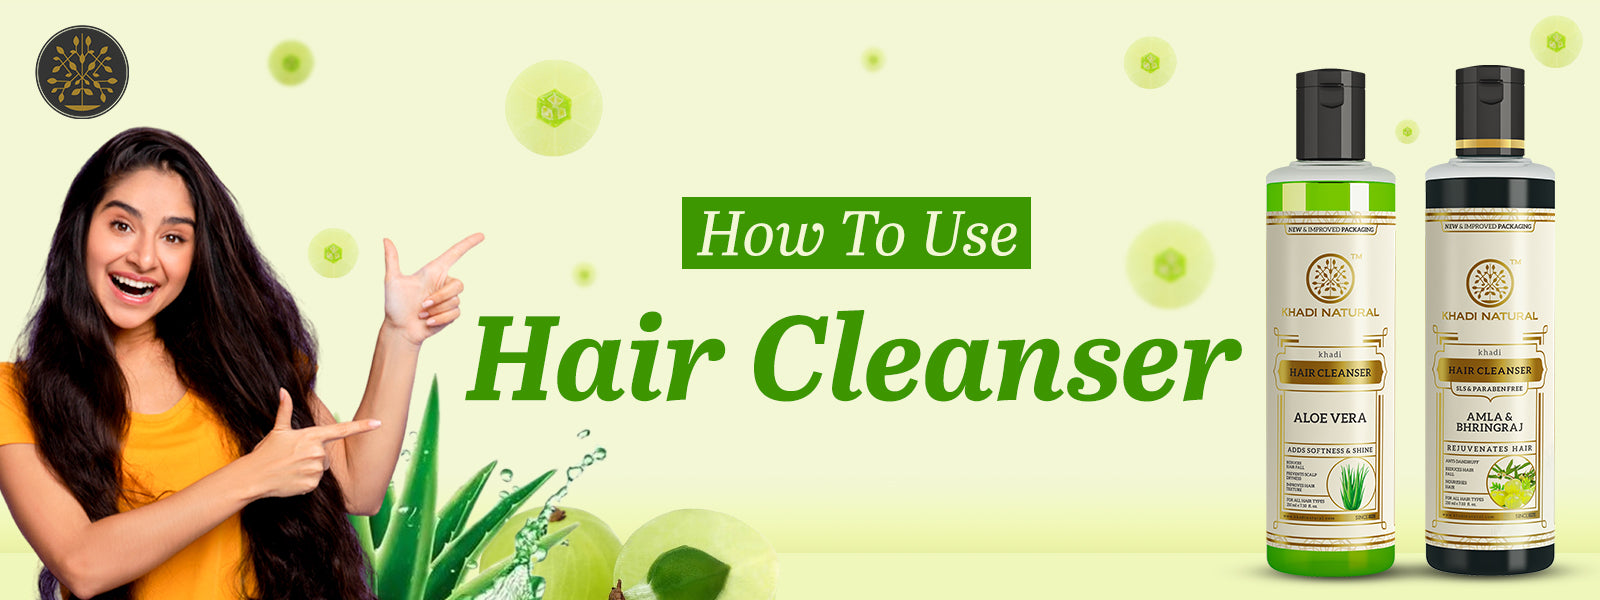 How to use hair cleanser